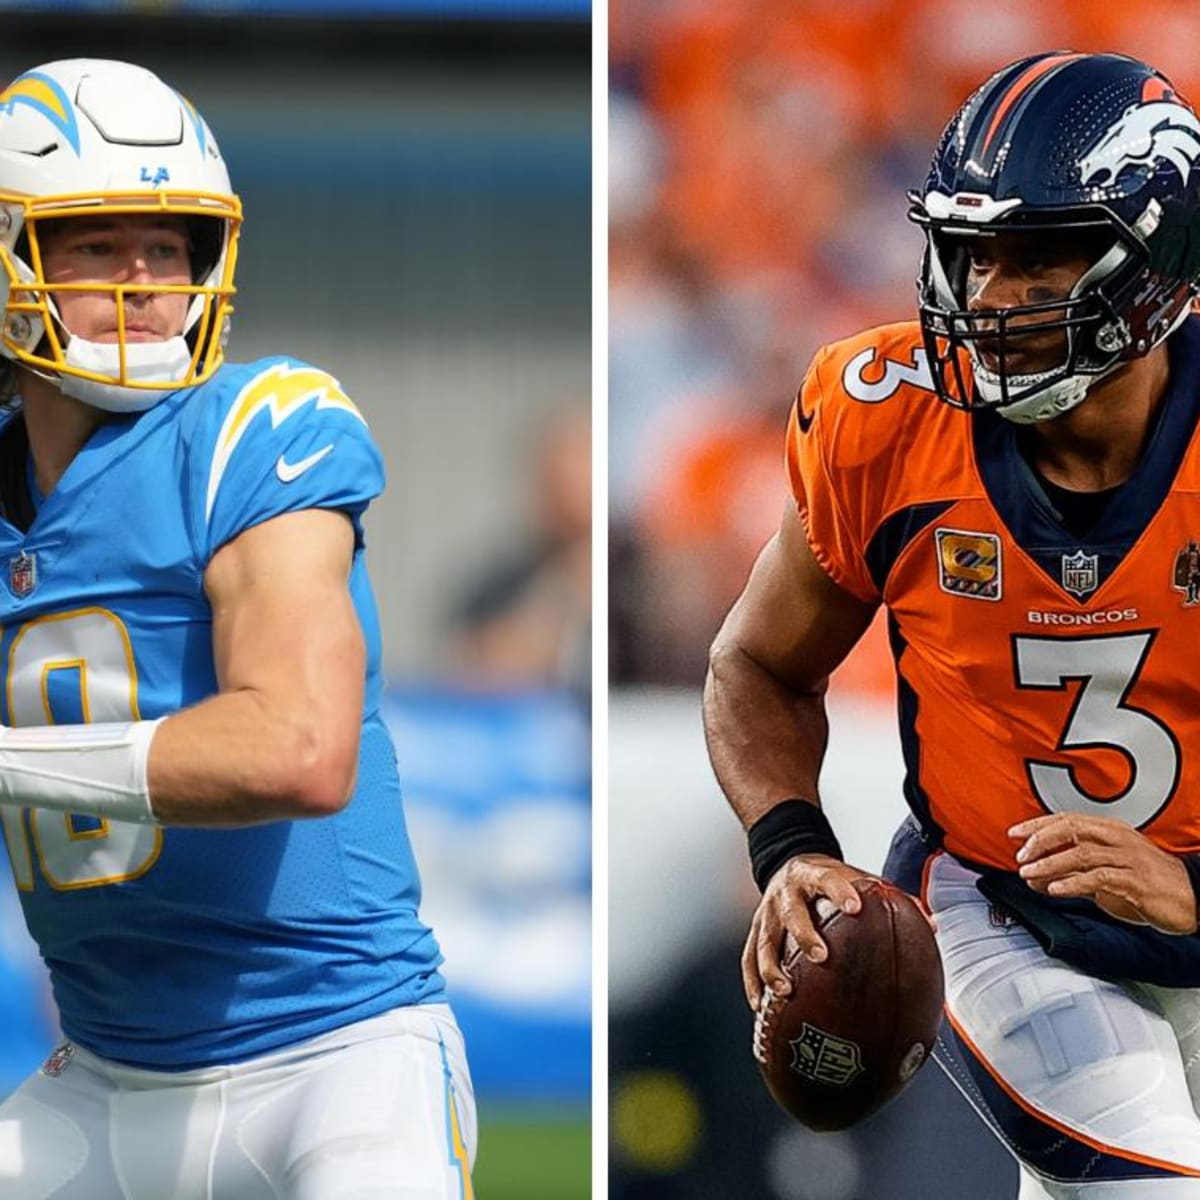 2022 NFL season: Four things to watch for in Broncos-Chargers game on  'Monday Night Football'